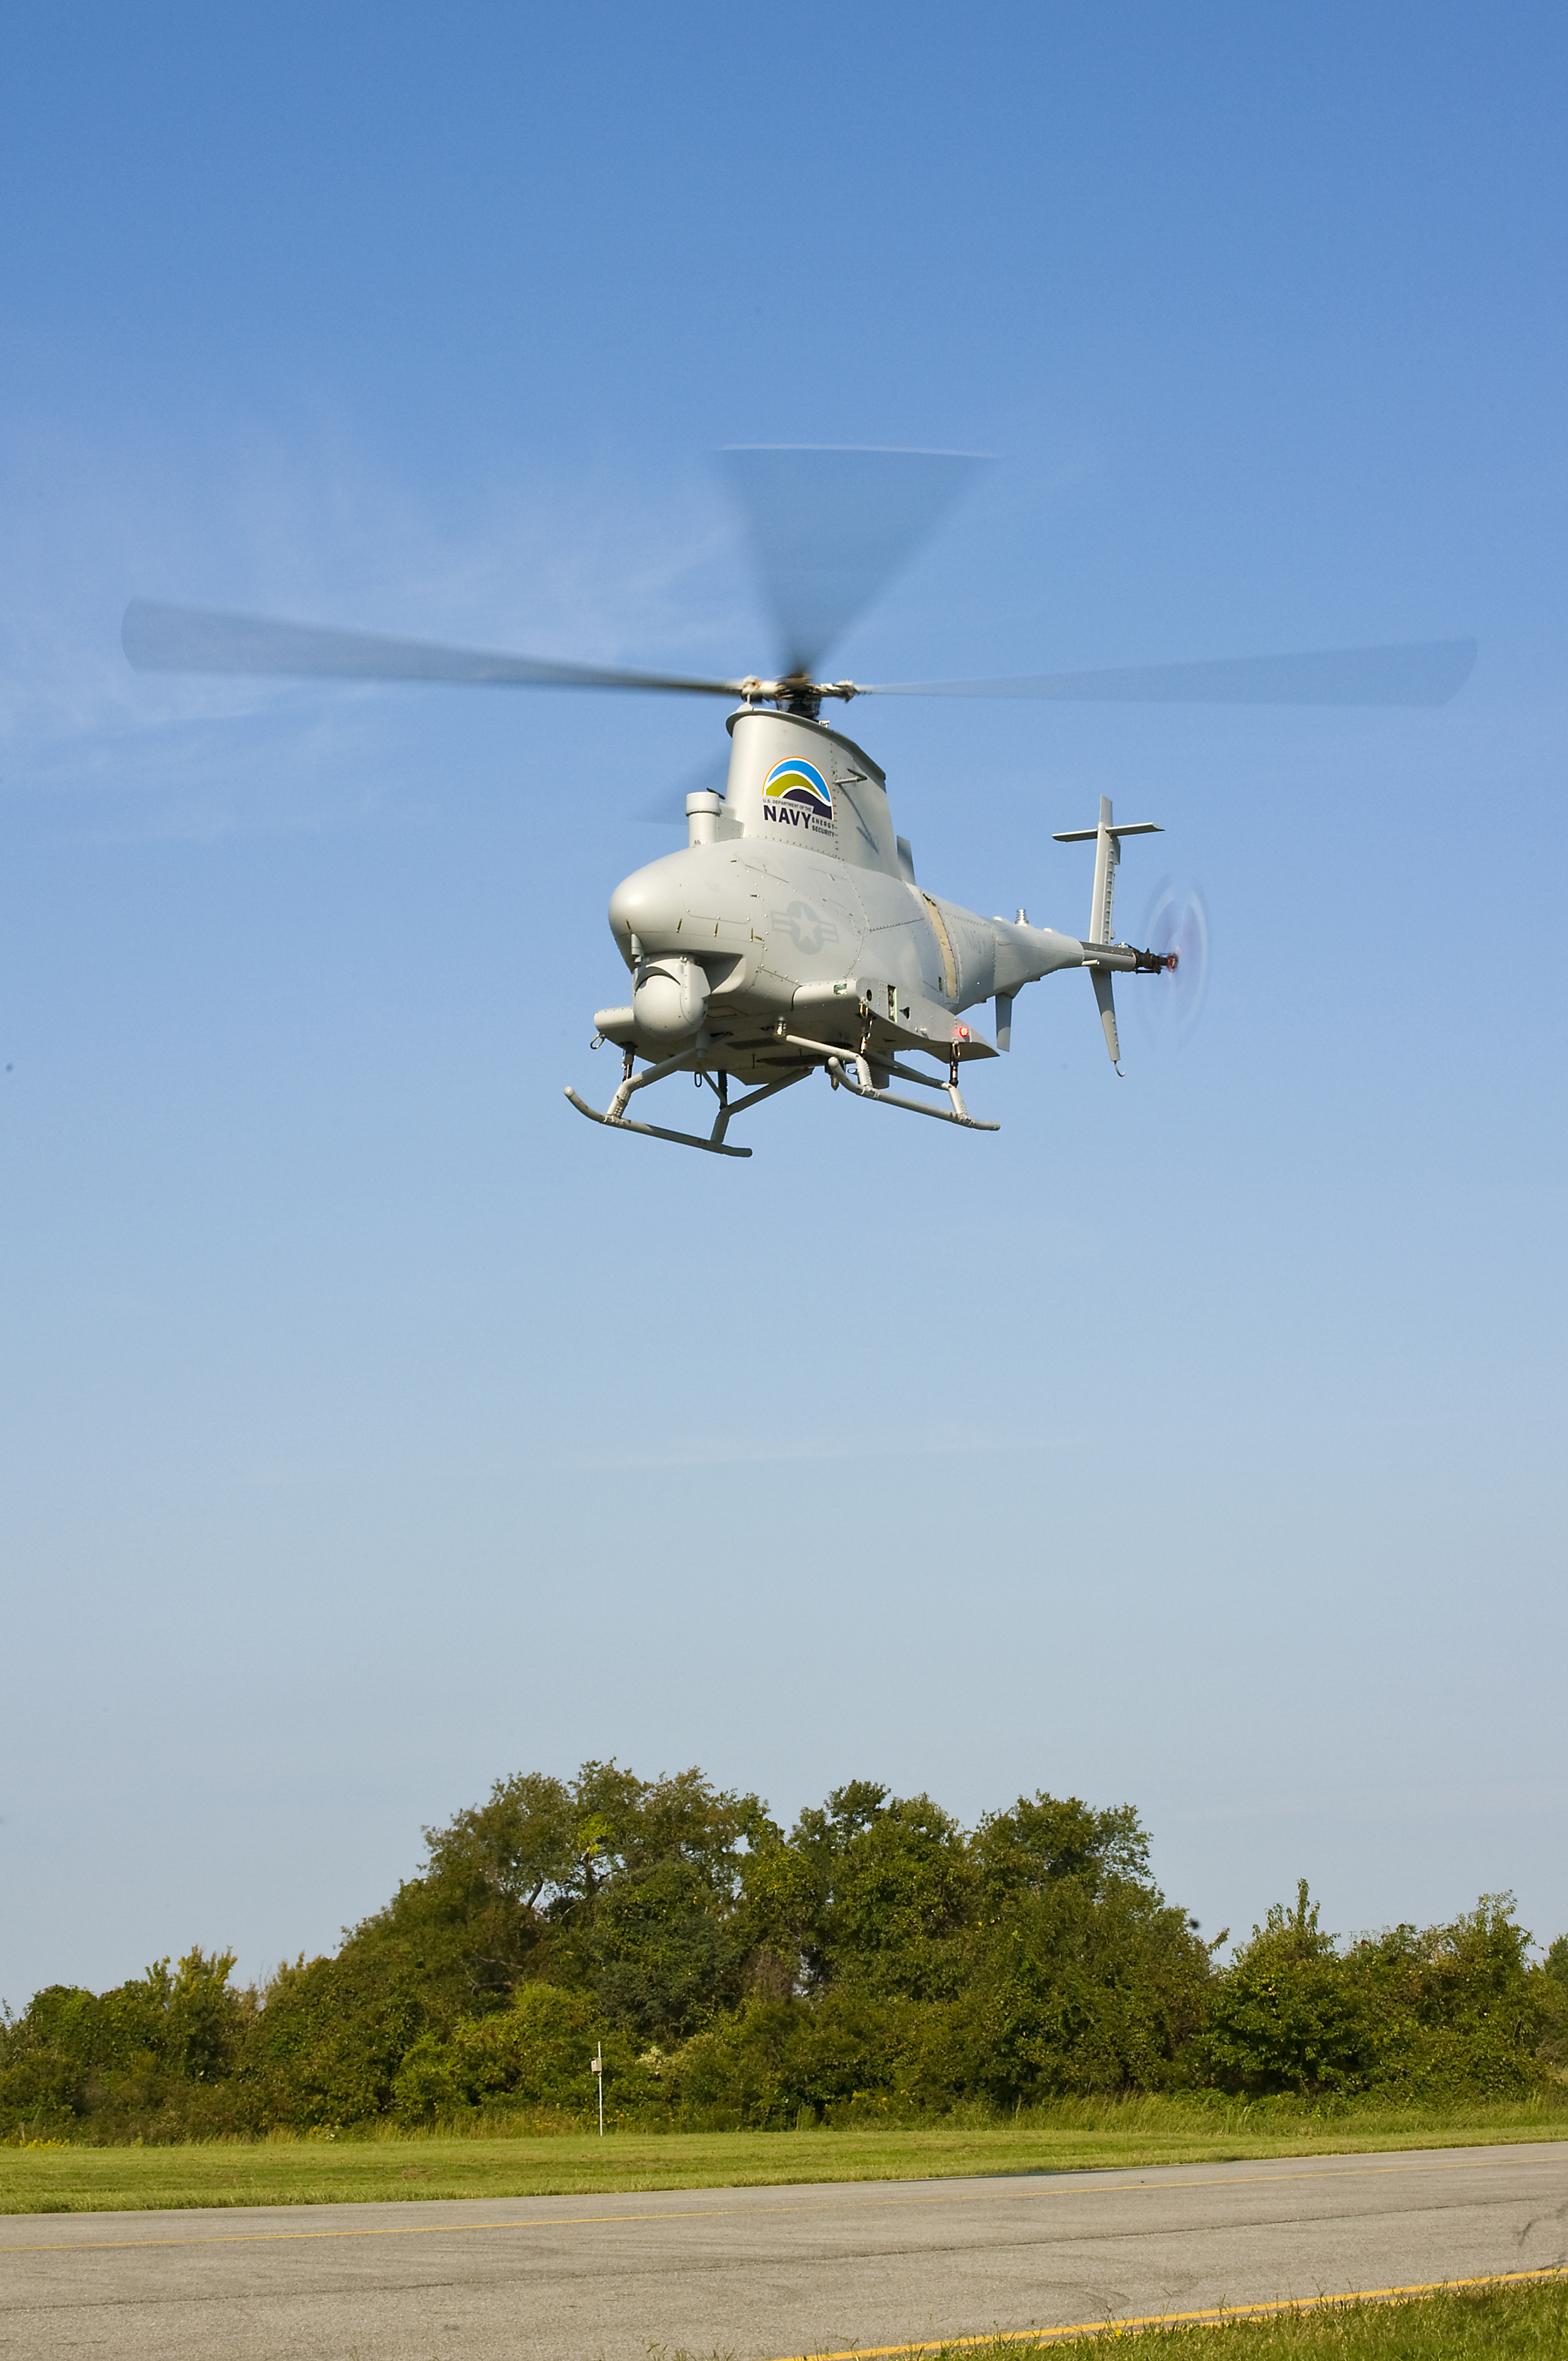 US Navy 110930-N-JQ696-401 An MQ-8B Fire Scout unmanned aerial vehicle (UAV) successfully completes the first unmanned biofuel flight at Webster Fi